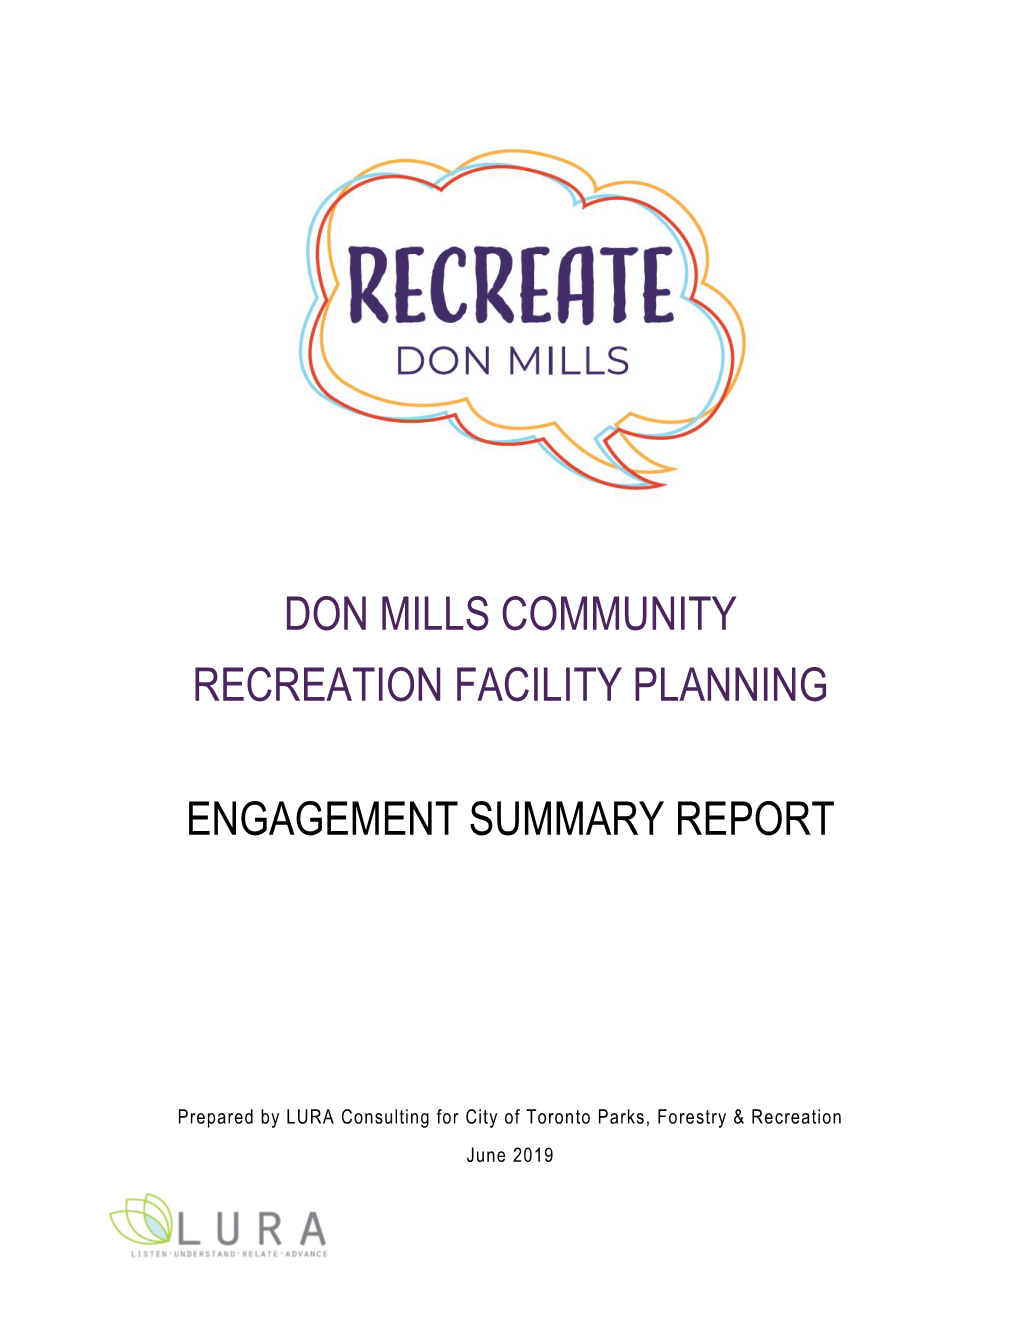 Don Mills Community Recreation Facility Planning Engagement